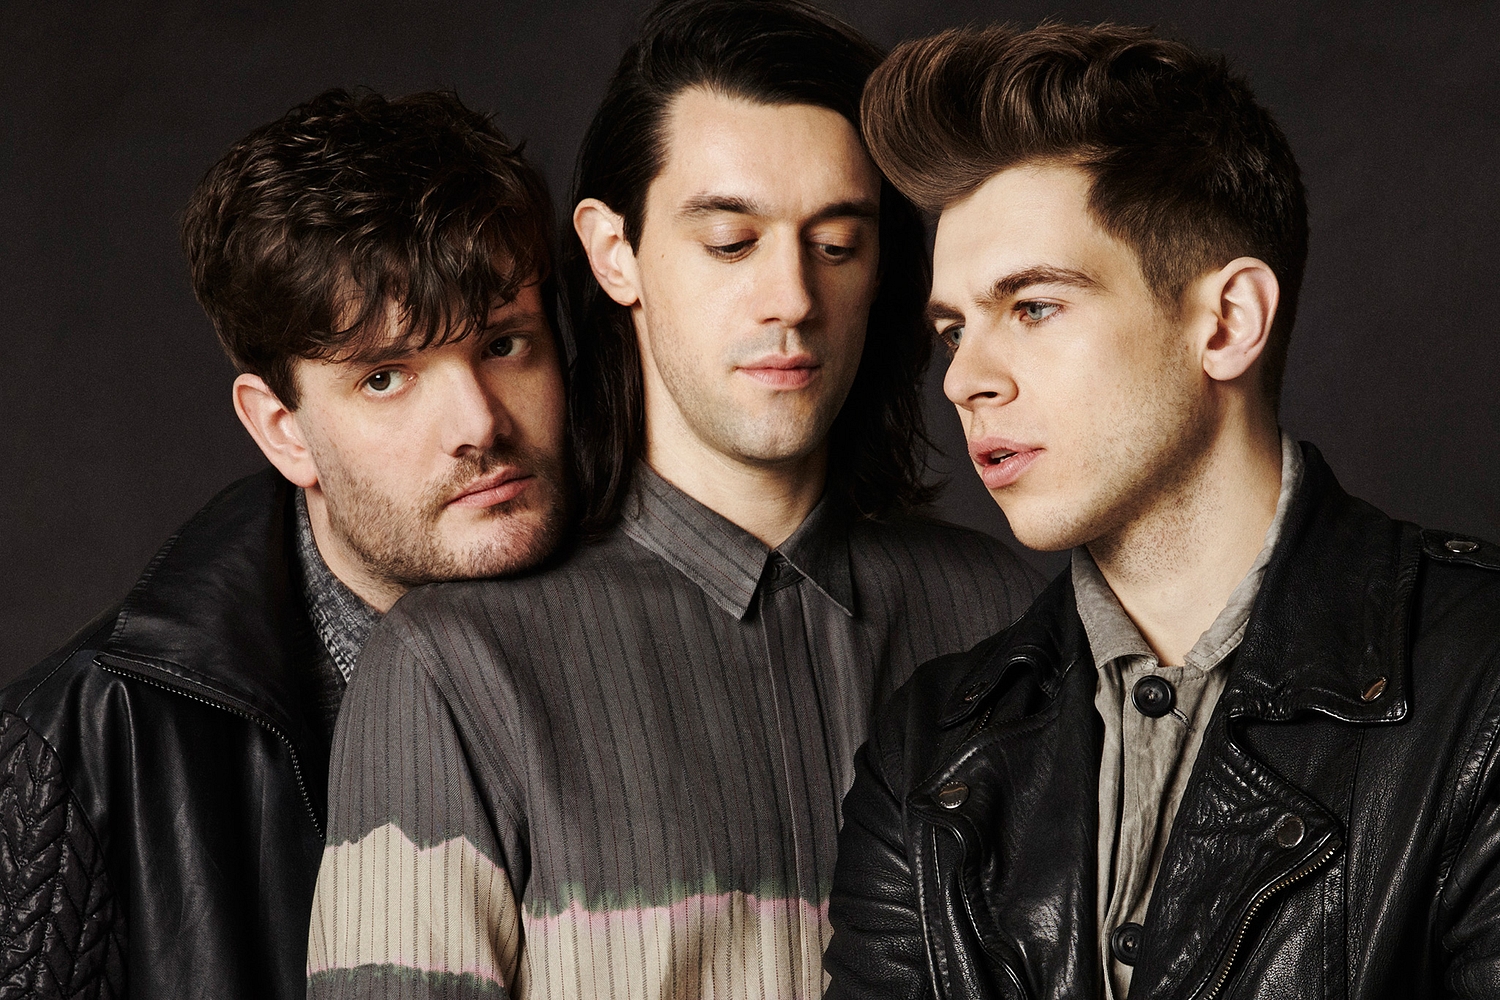 Klaxons announce world’s “first ever 3D printed tour”